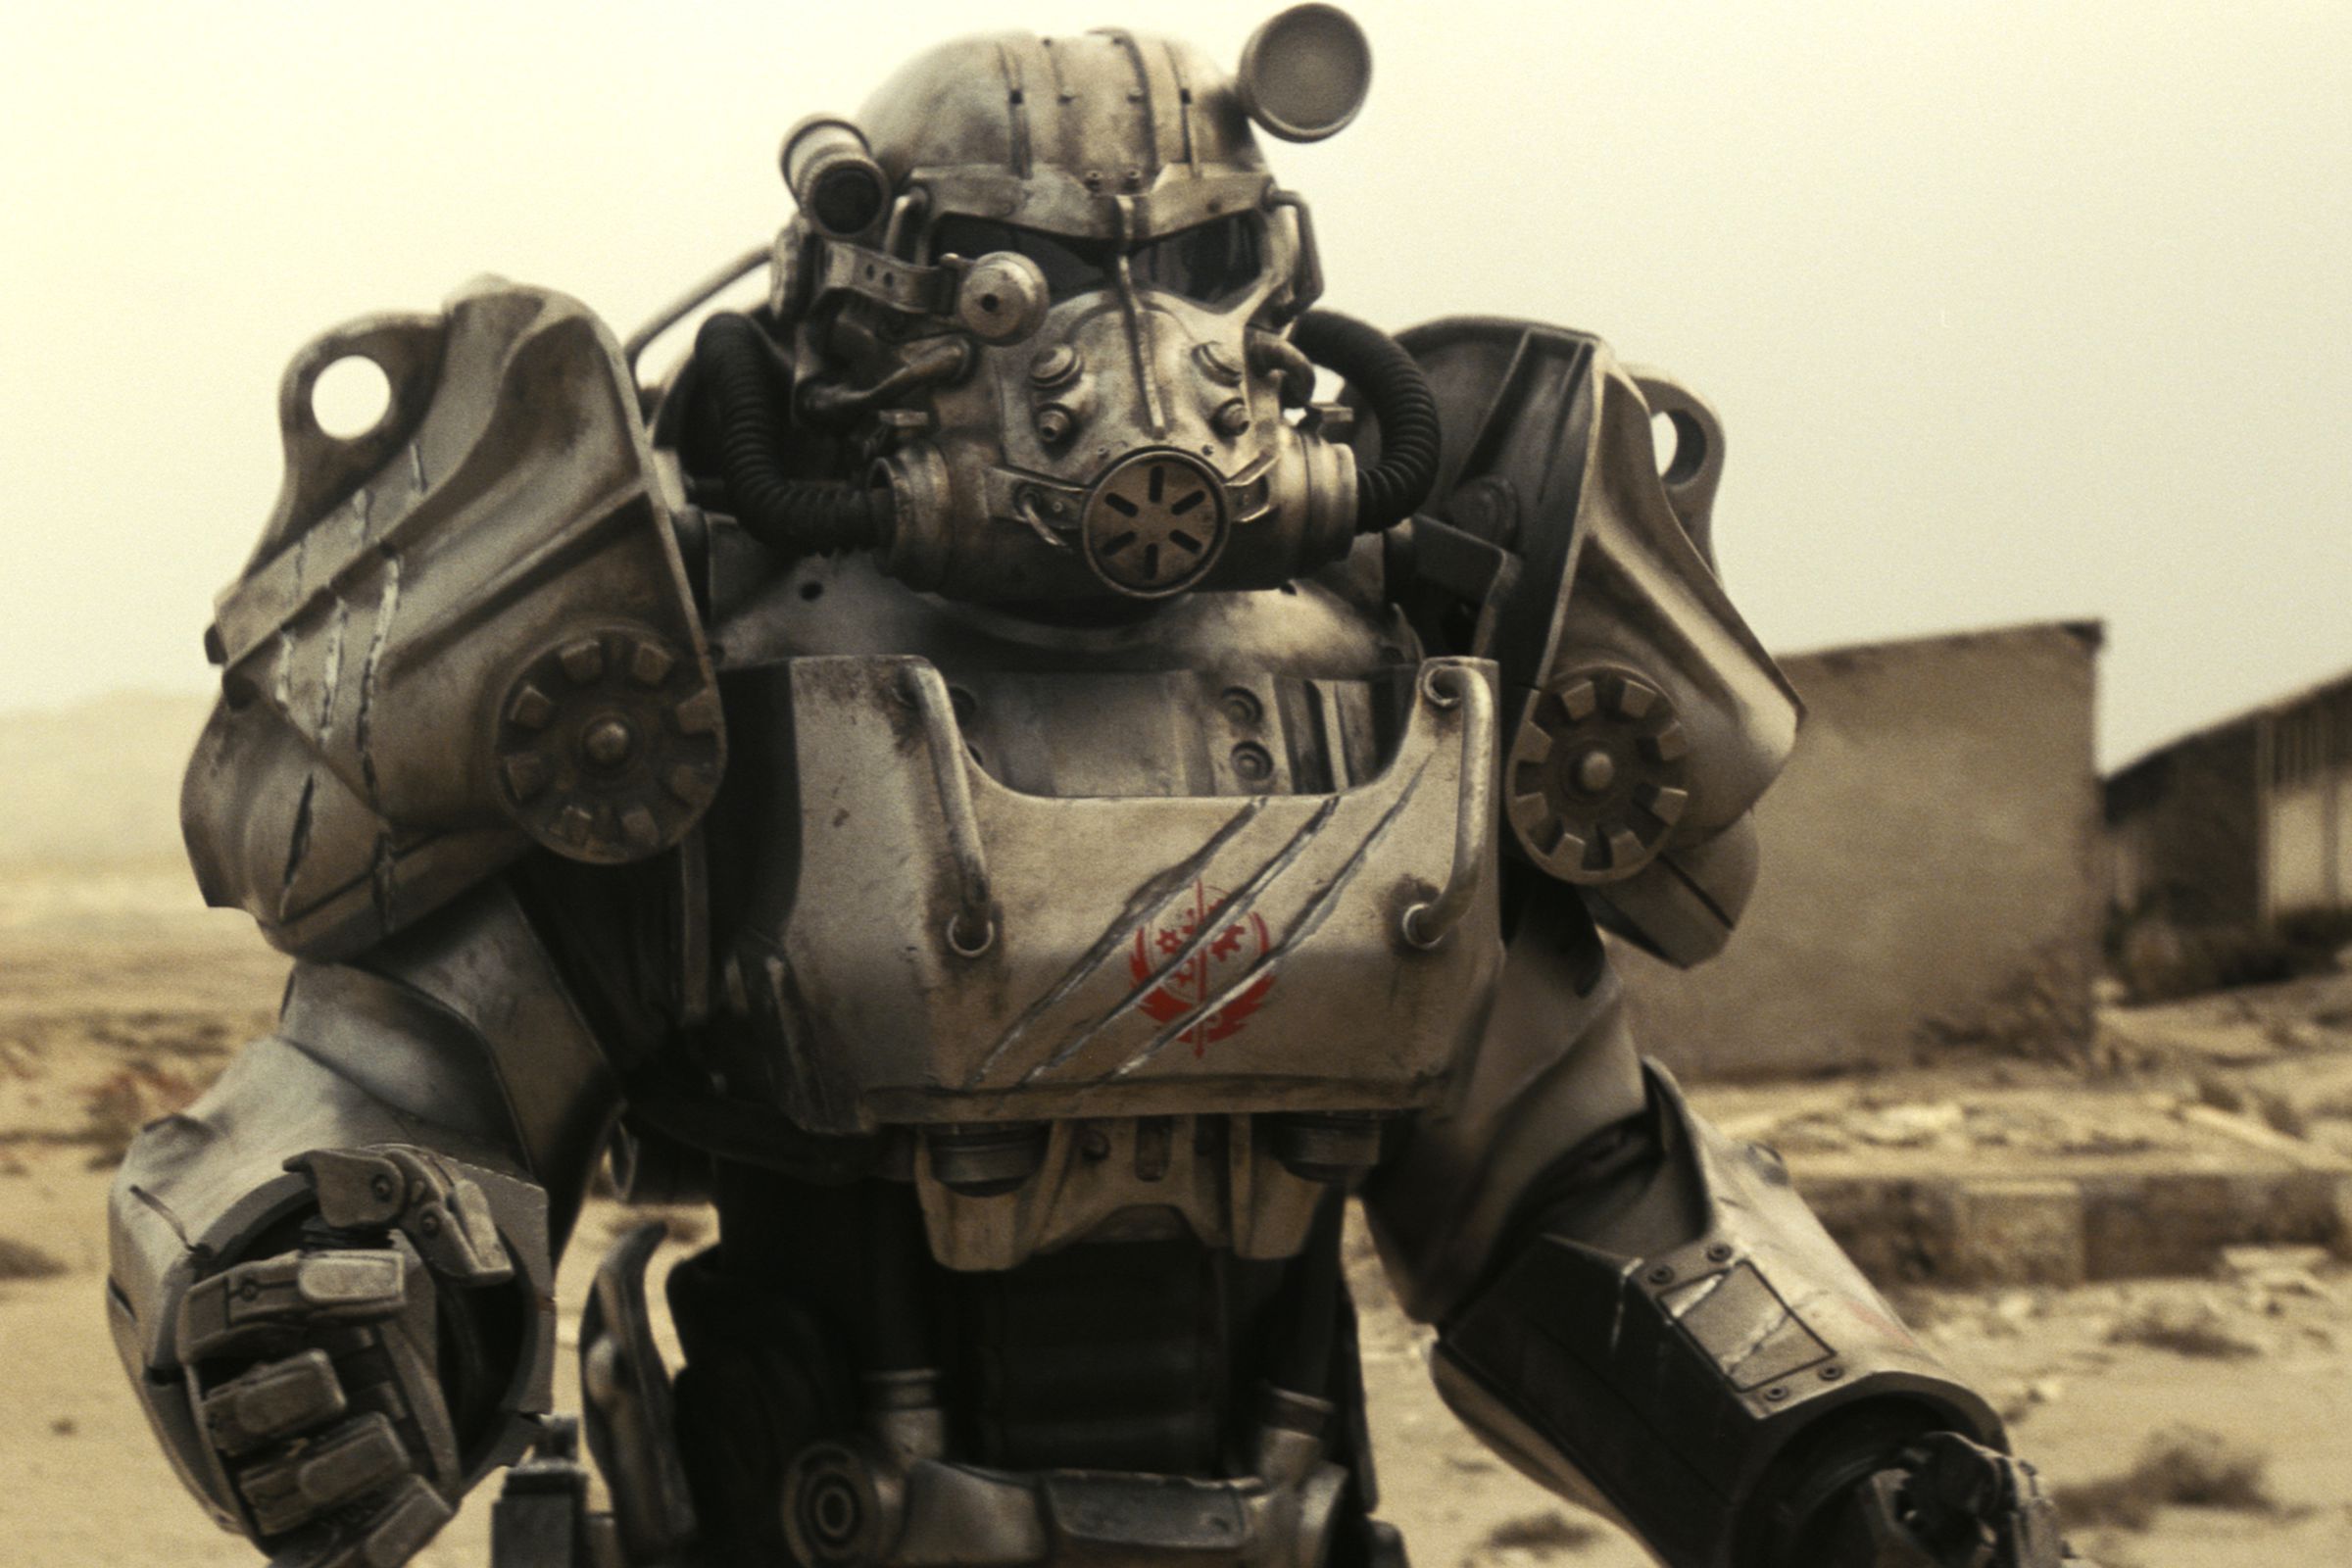 A still photo from Amazon’s live-action Fallout TV series.